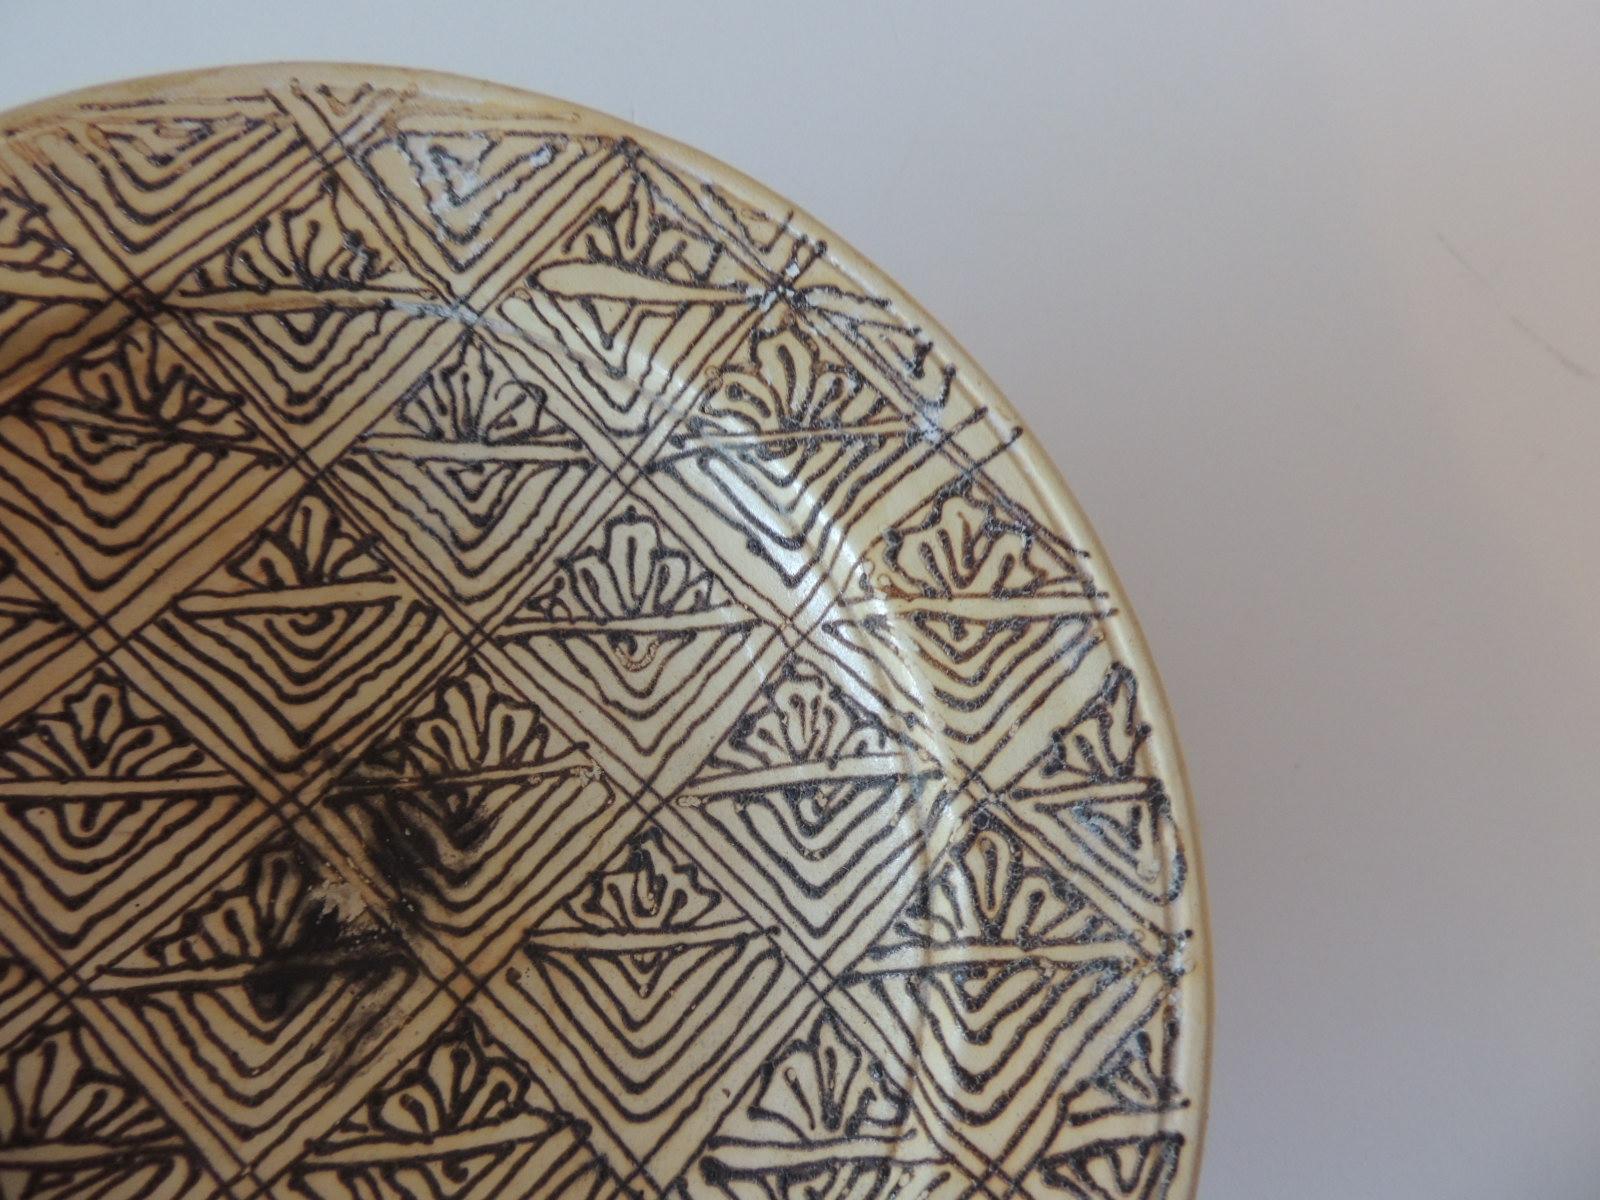 Brown and tan graphic terracotta round decorative plate,
Hanging hole in the back.
Size: 8.5